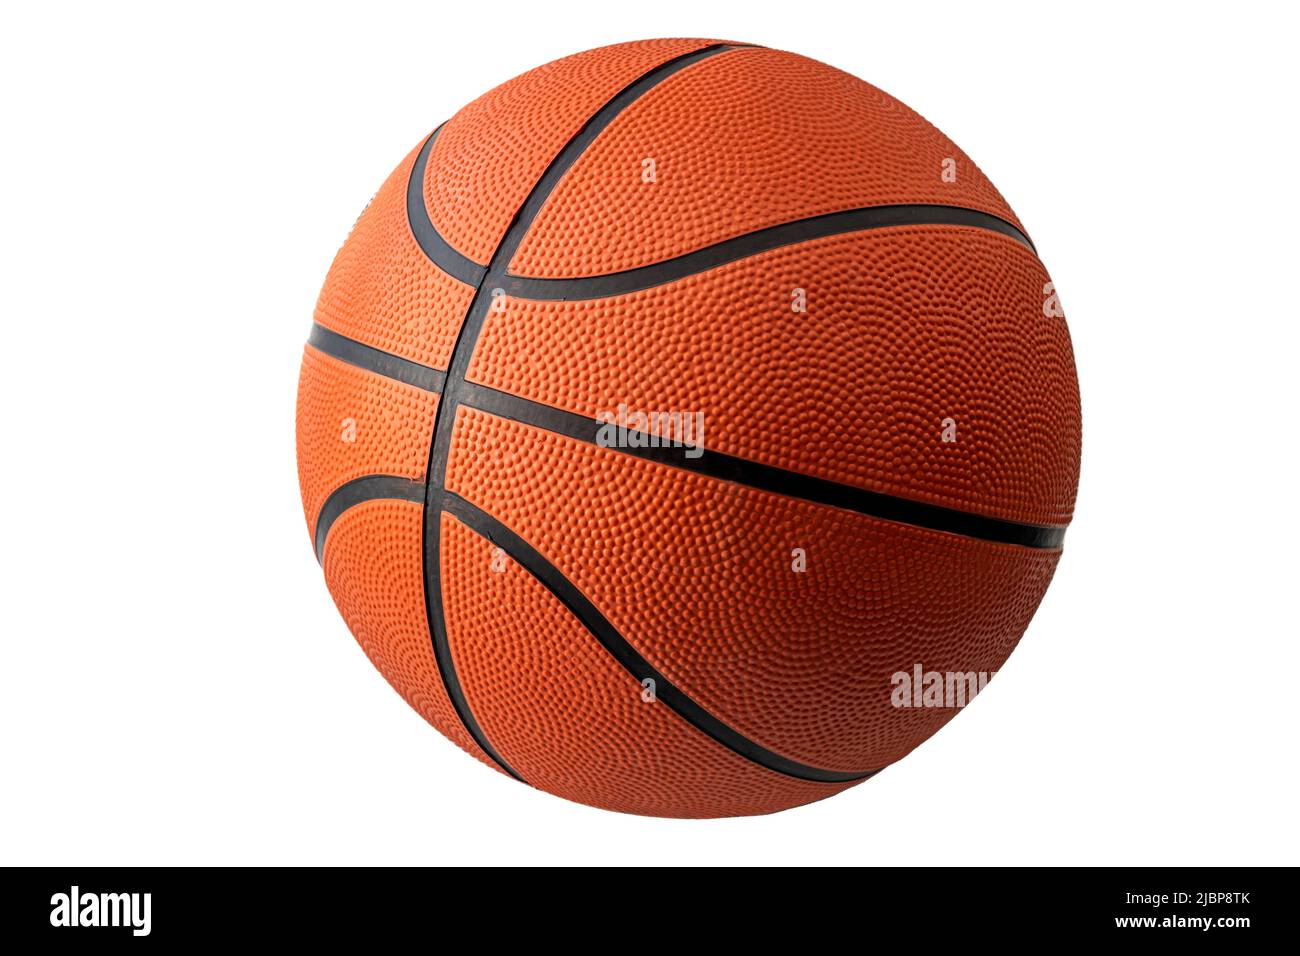 Team sports backgrounds, basketball championship picture and athletics tournament clipart concept with PNG photo of orange ball isolated on transparen Stock Photo